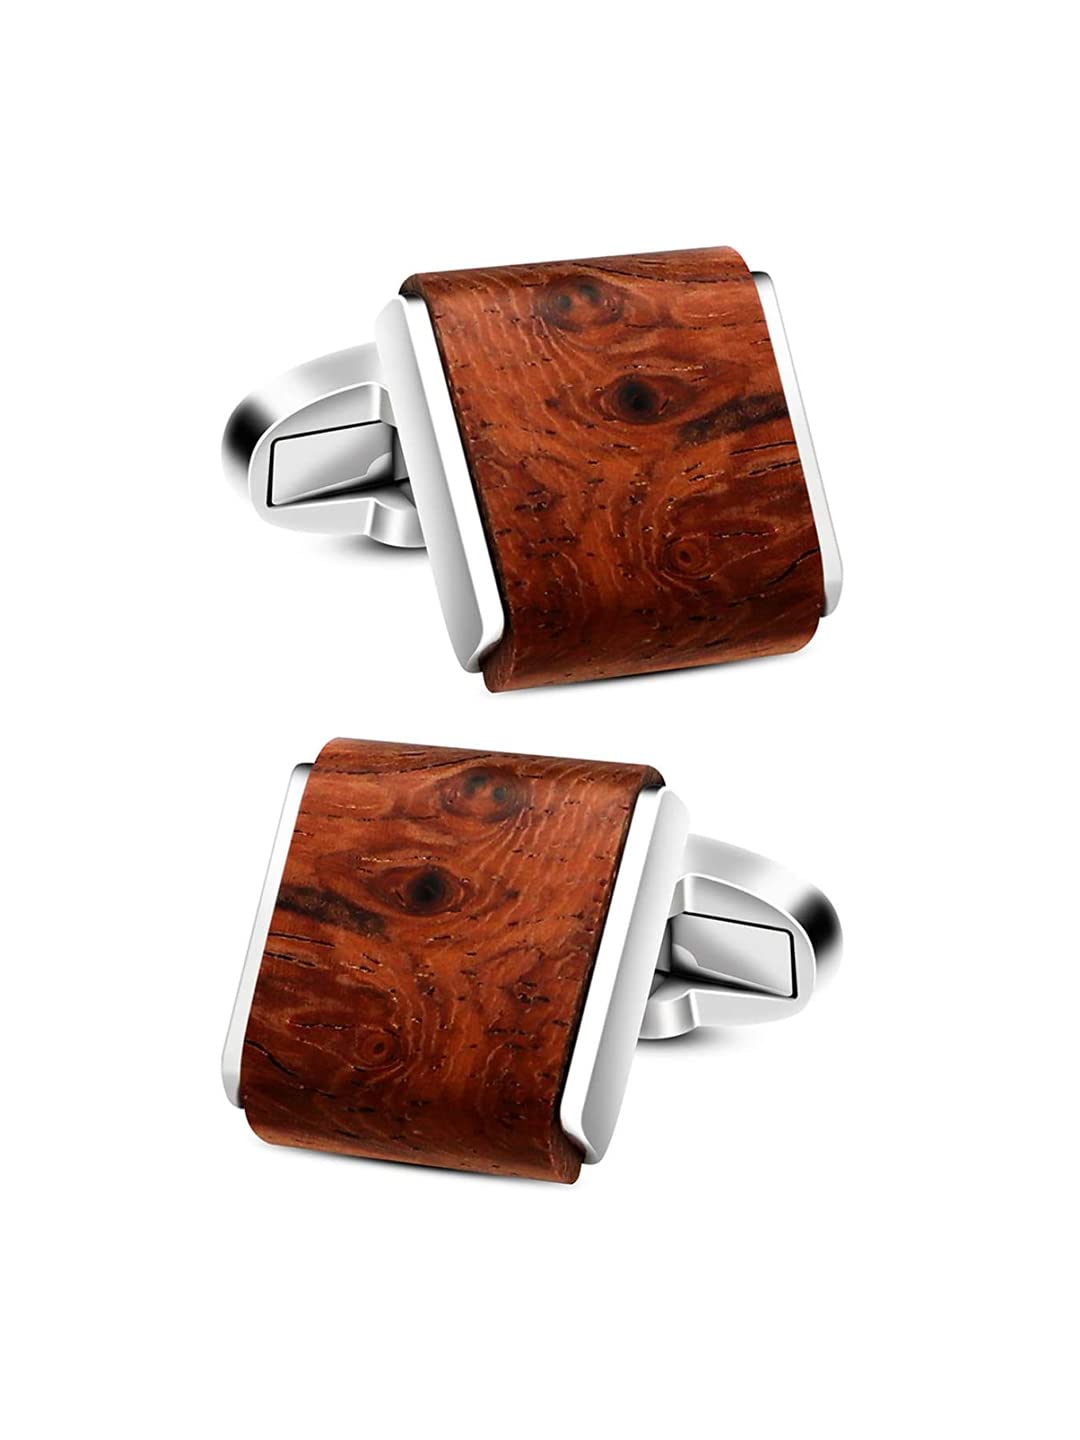 Yellow Chimes Cufflinks for Men Cuff links Stainles Steel Wooden Brown Silver Cufflinks for Men and Boy's